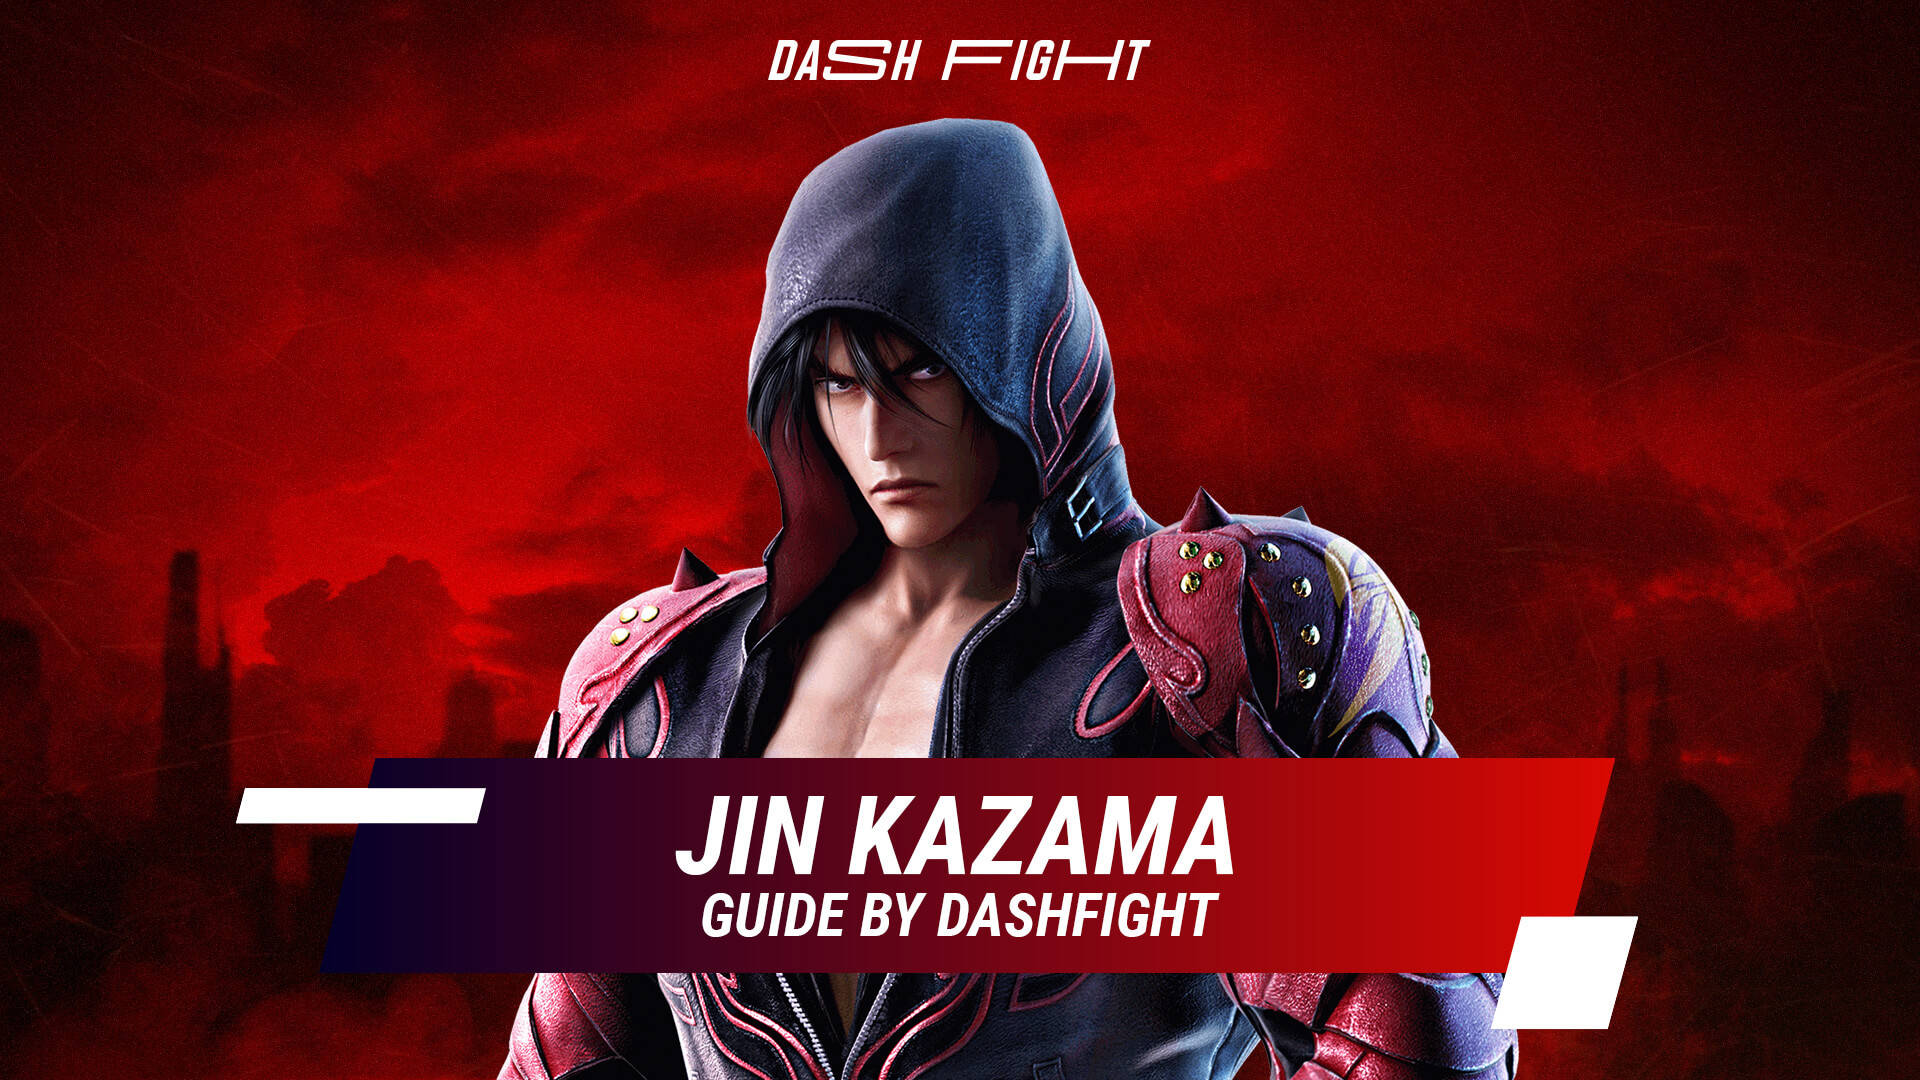 Jin Kazama In Red Aesthetic City Background